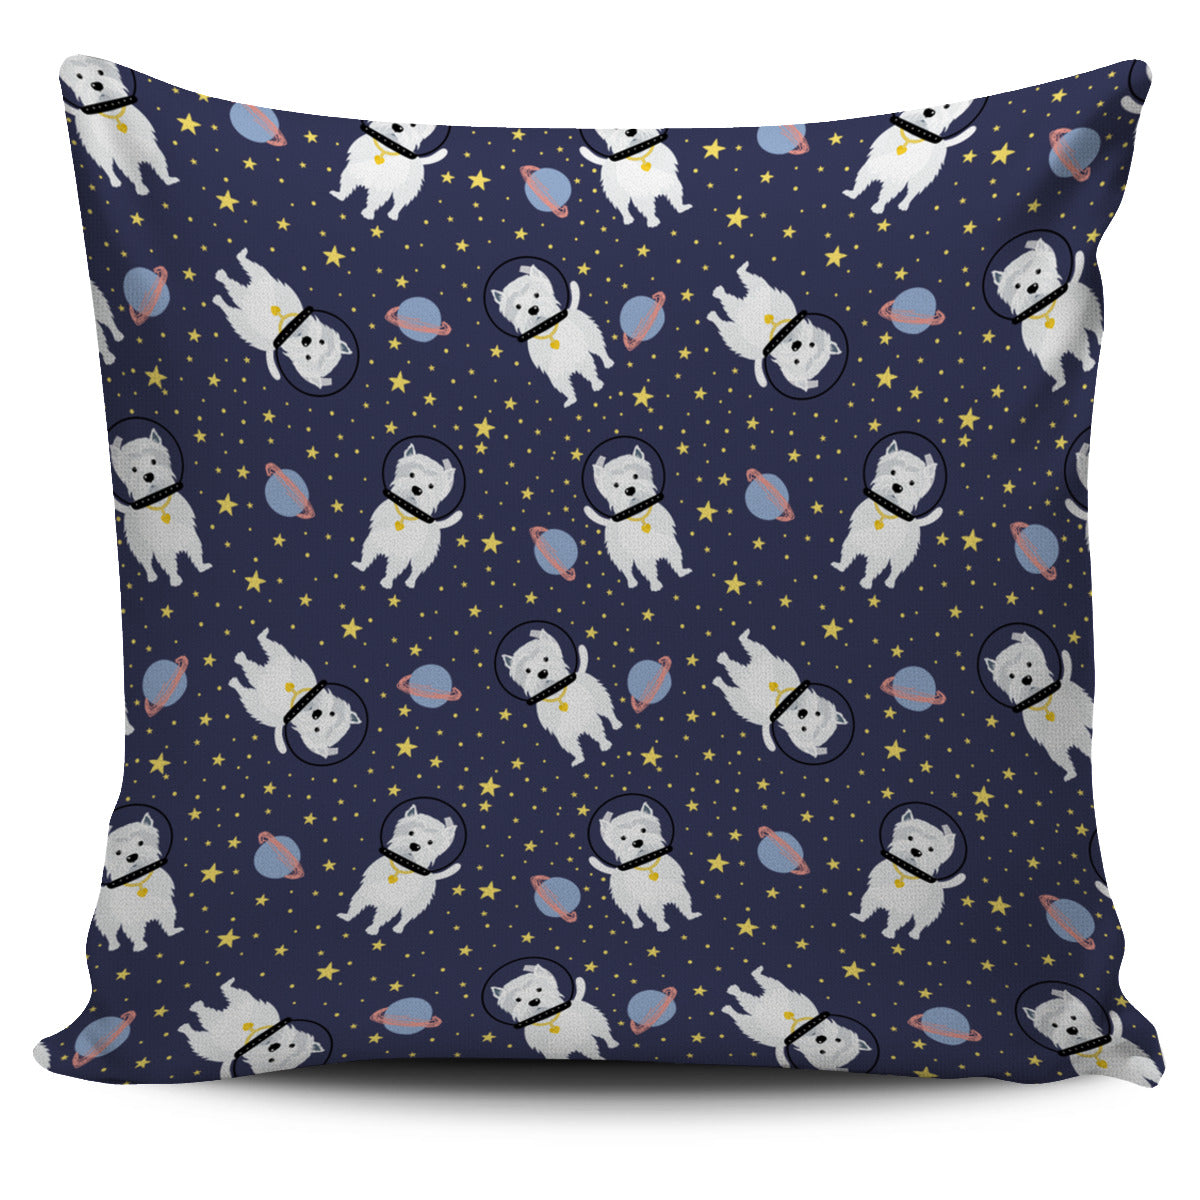 Space Westie Pillow Cover